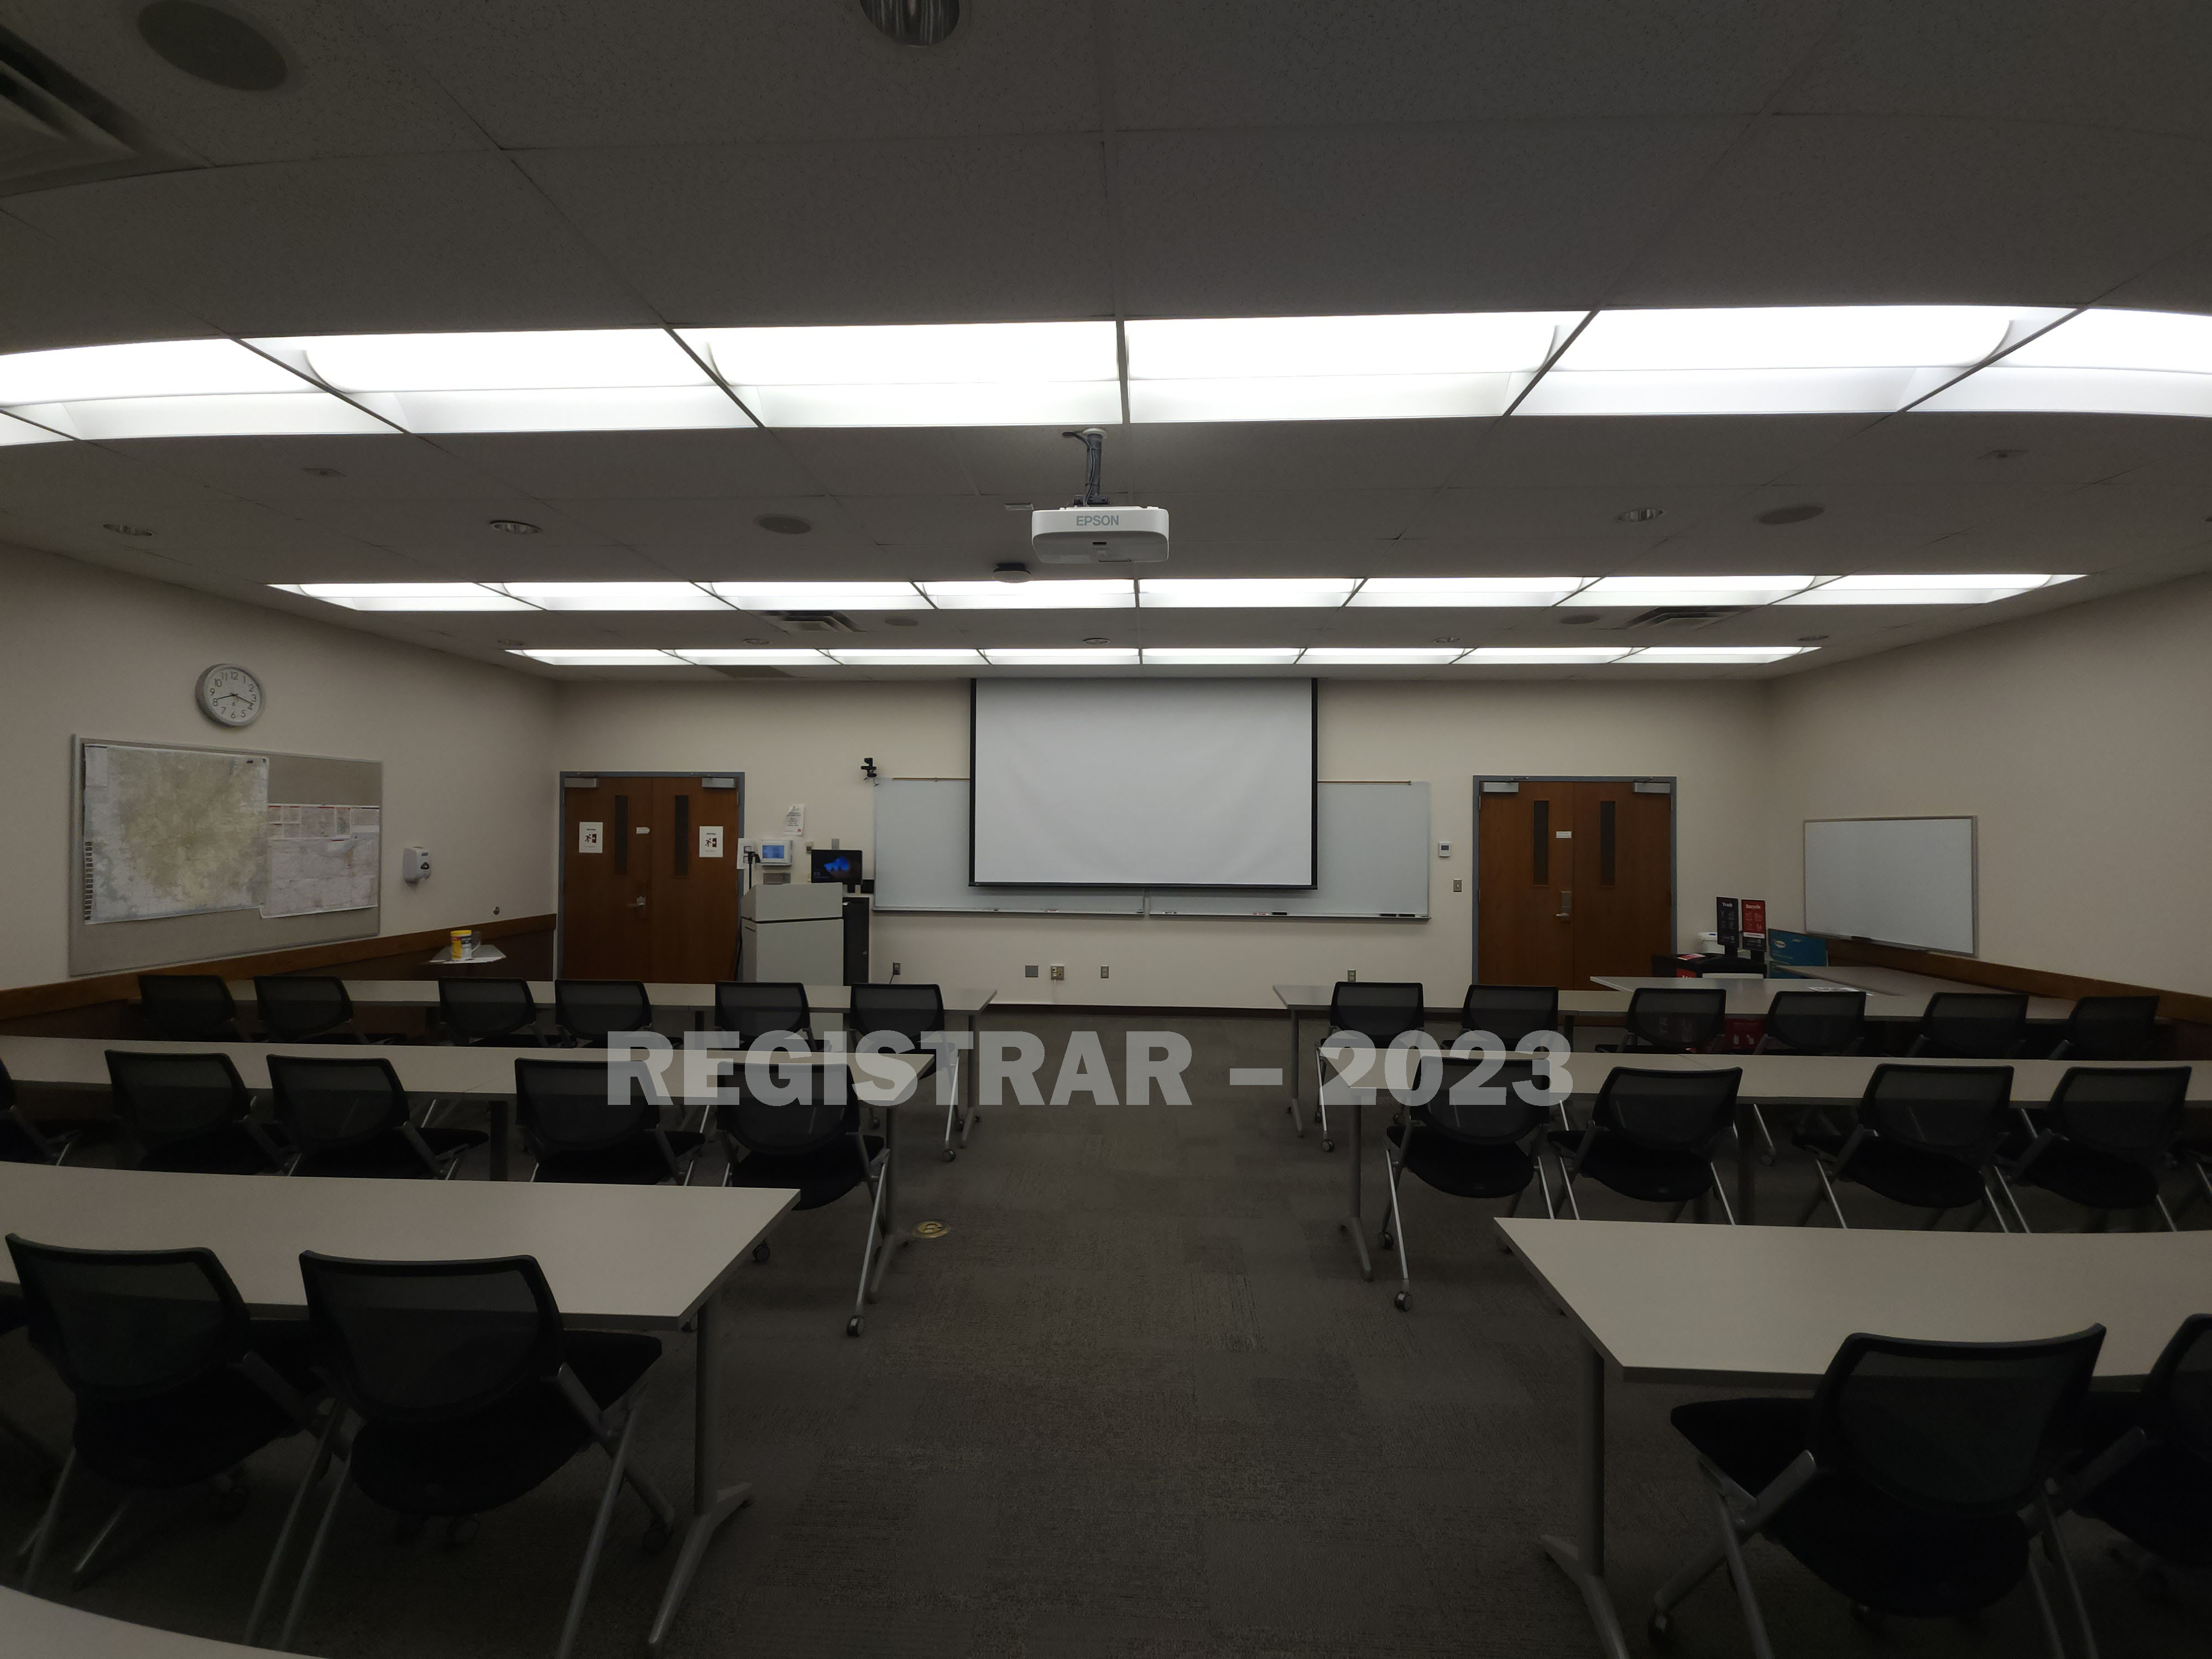 Derby Hall room 1080 ultra wide angle view from the back of the room with projector screen down